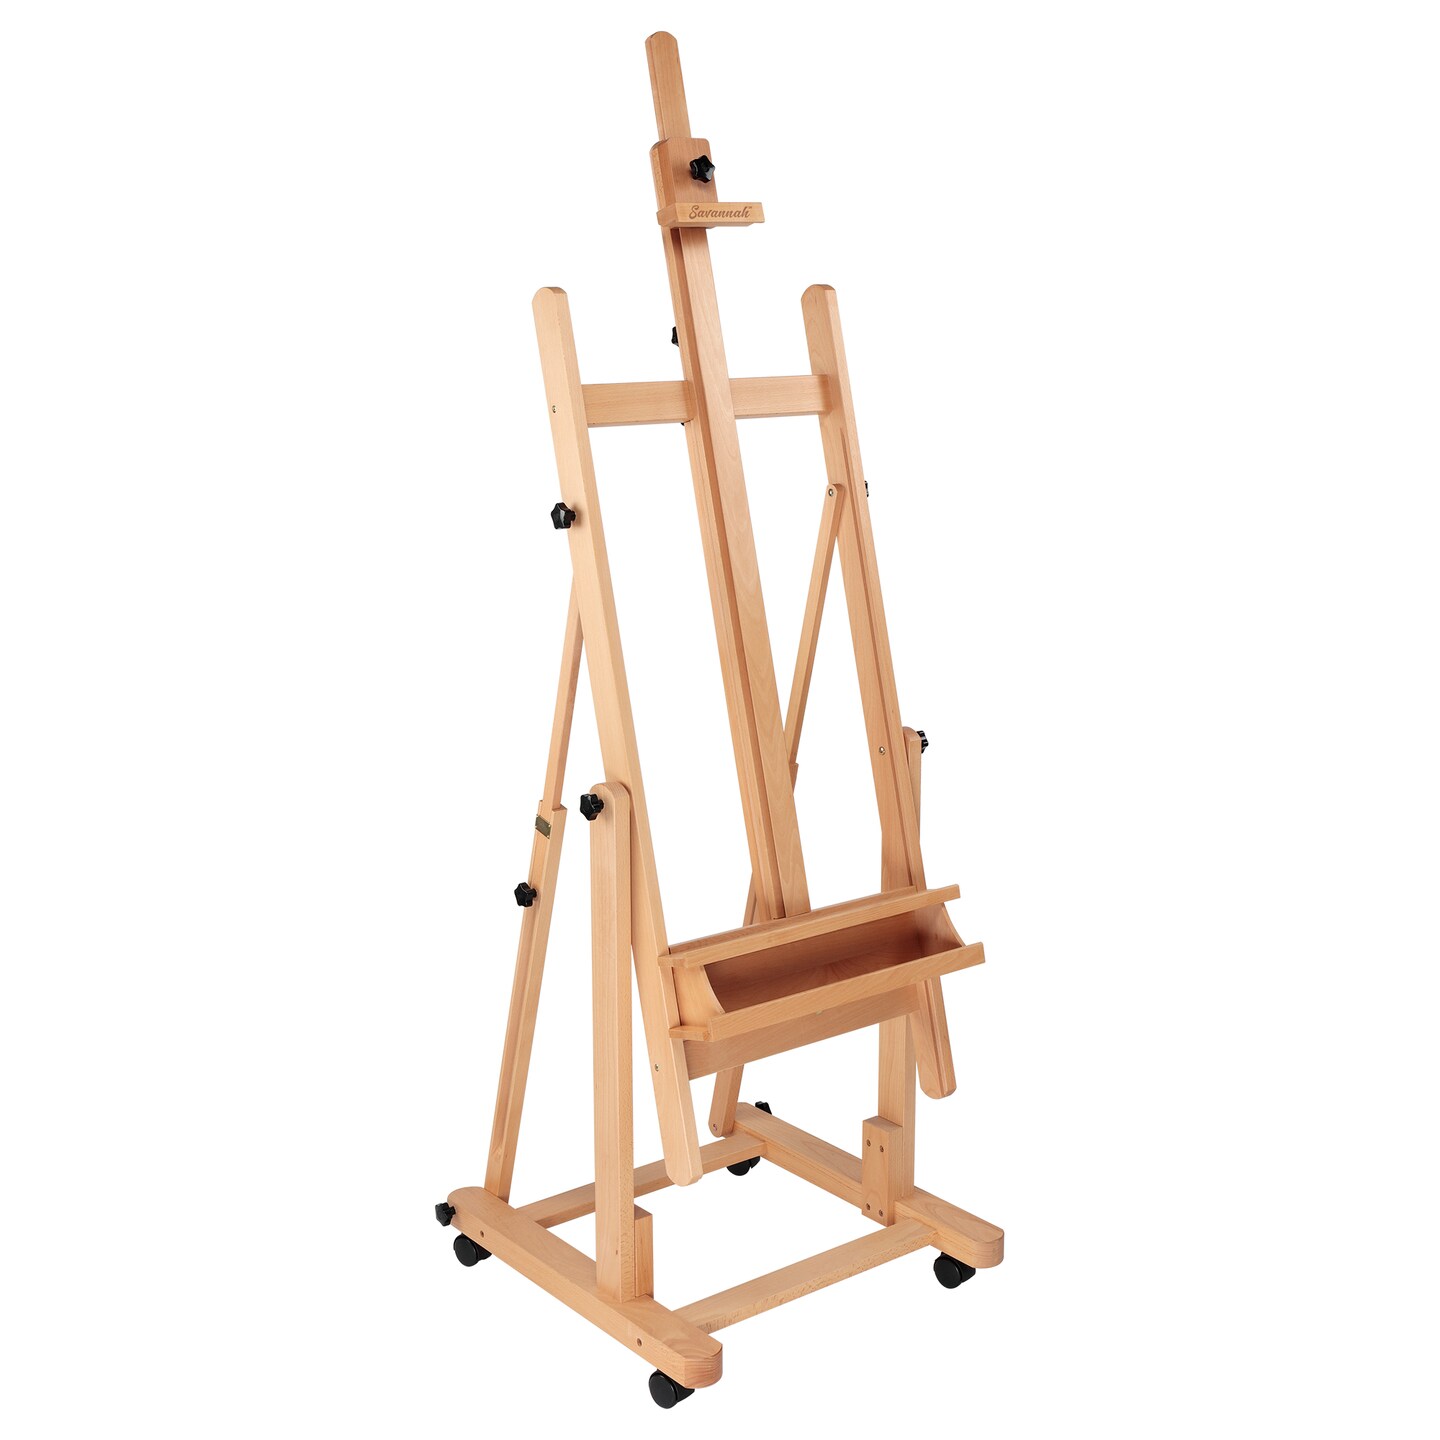 Creative Mark Savannah Studio Easel - Portable LightWeight Art Easel With Adjustable Angles With Wheels - Ideal For Artist, Perfect for Painting - Storage Drawer - Natural Finish - Ideal For Artist